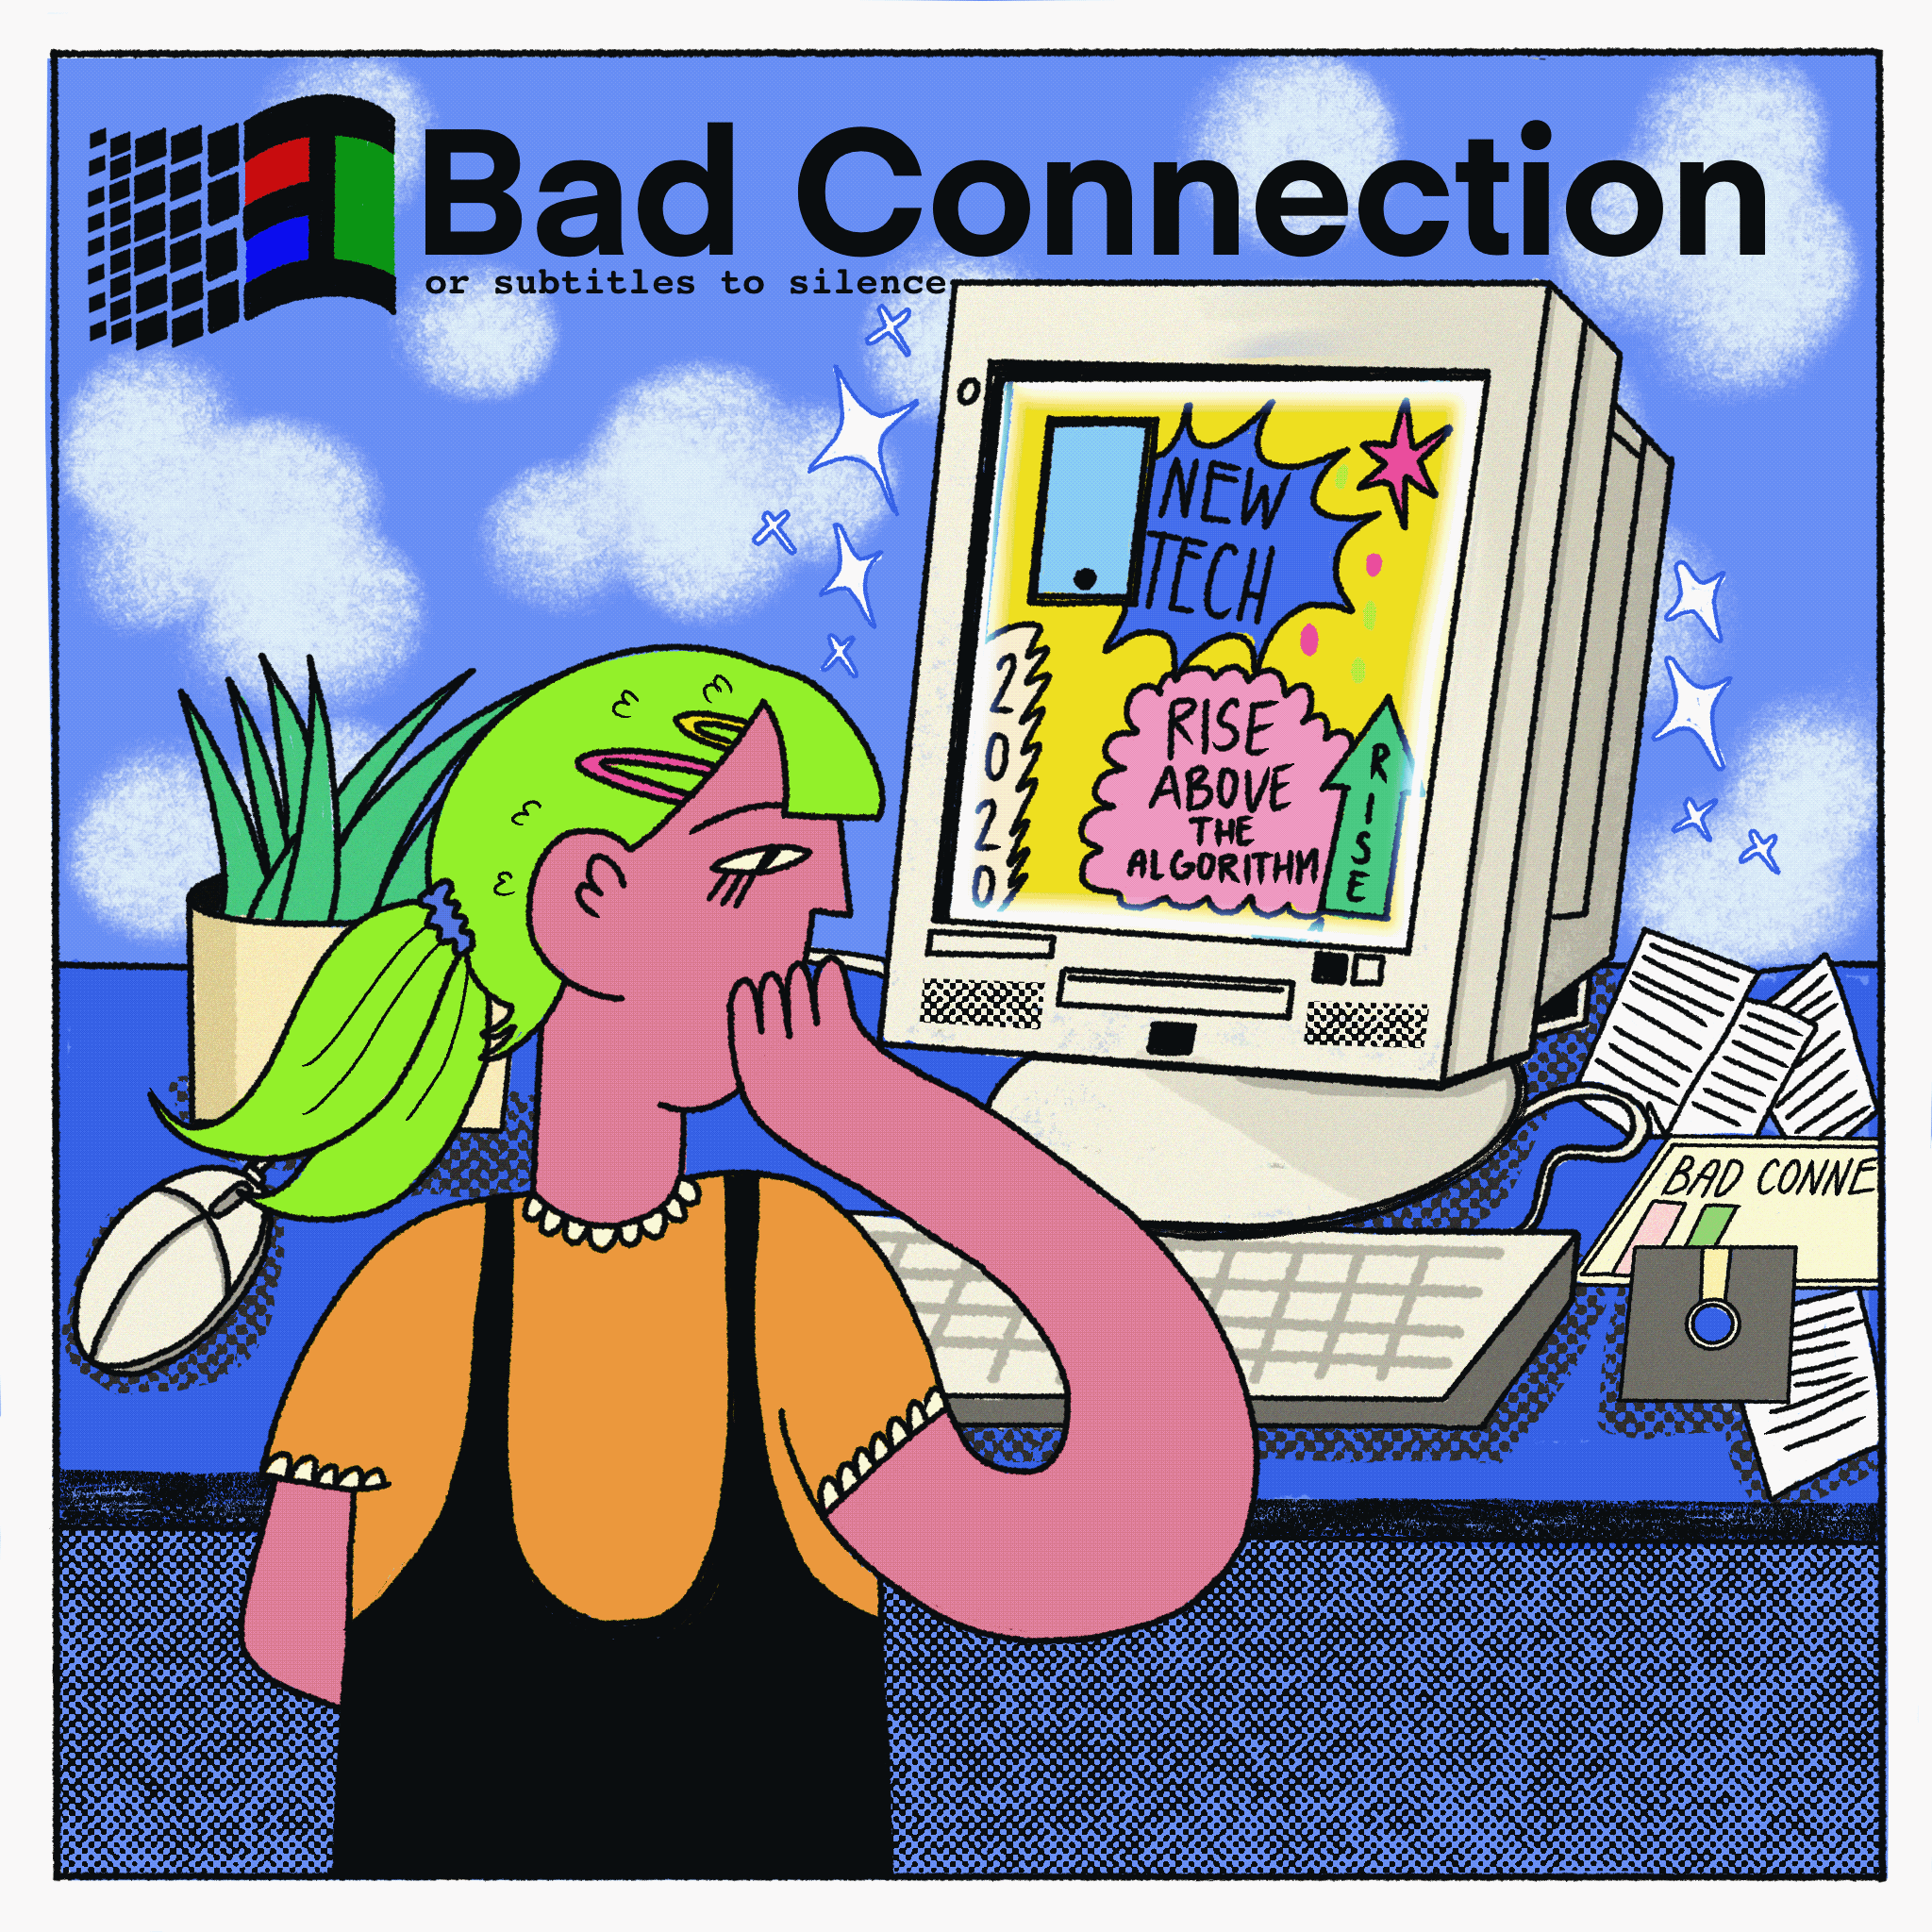 800-bad-connection-posters-2020